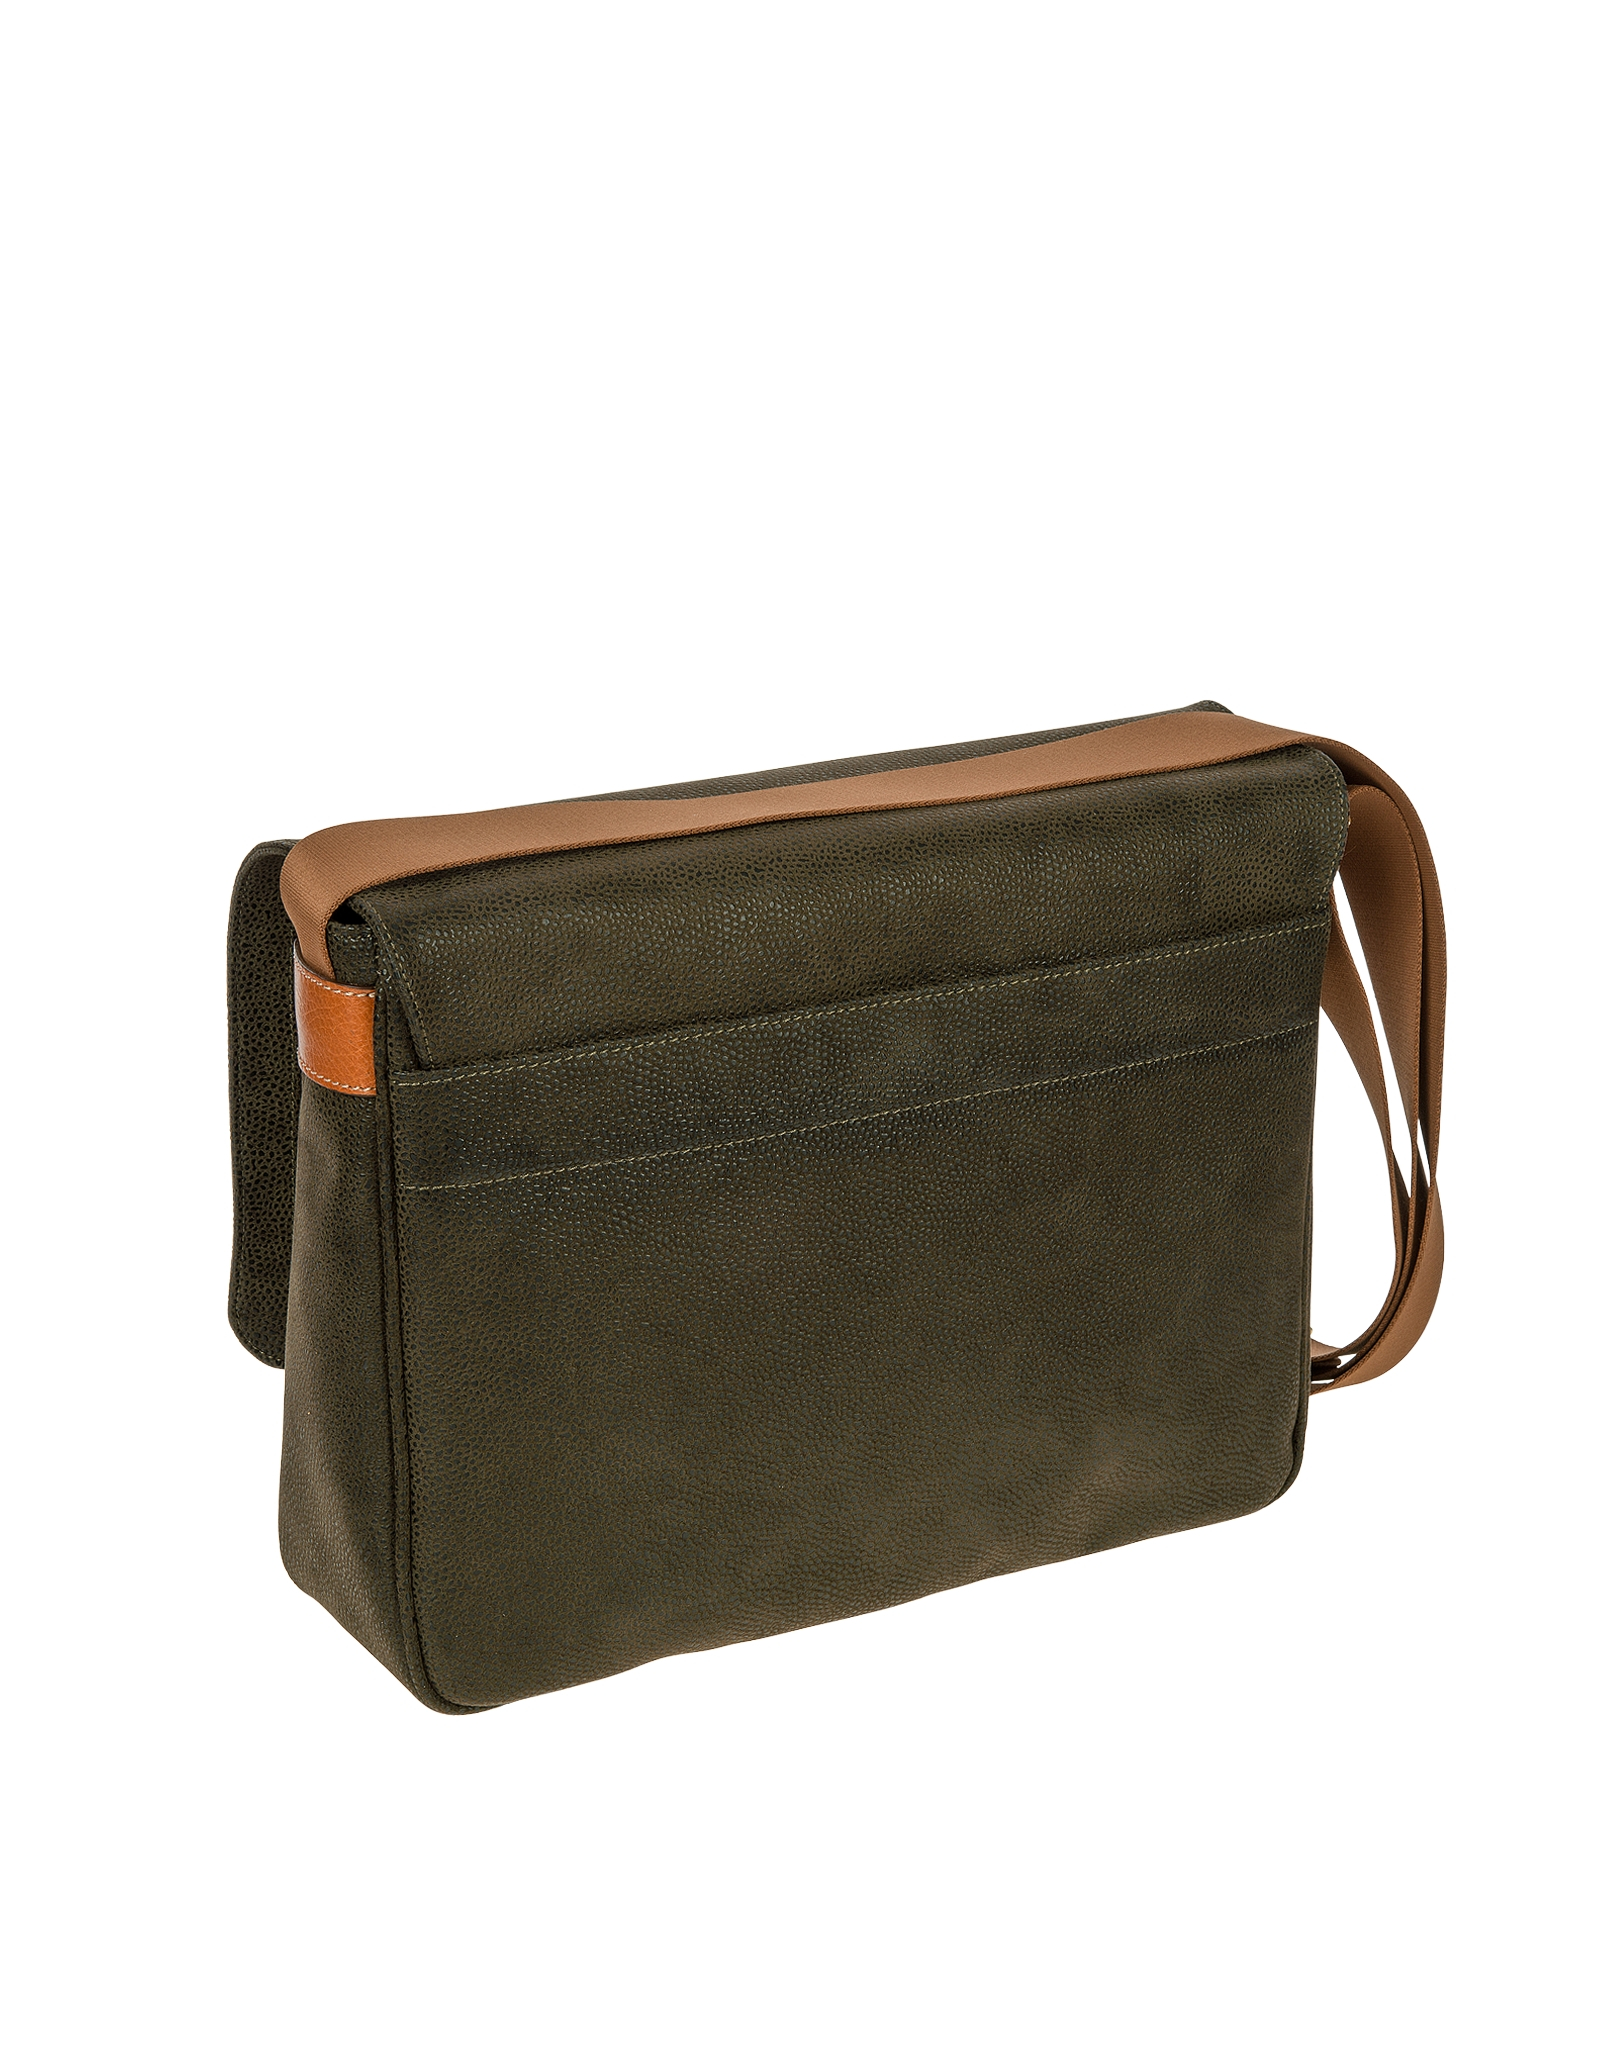 Lyst - Bric'S Life Olive Green Messenger Bag in Green